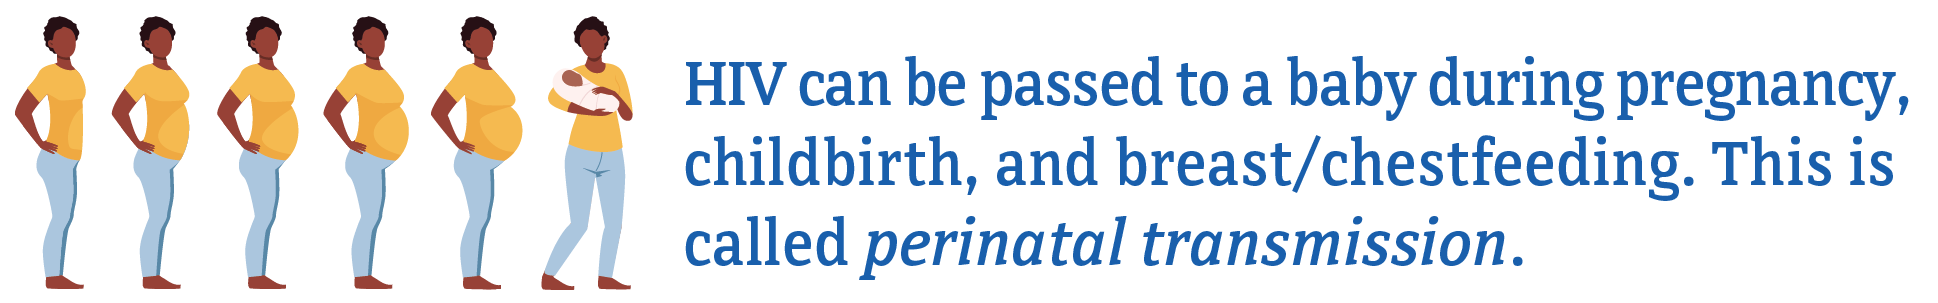 HIV can be passed to a baby during pregnancy, childbirth, and breast/chestfeeding. This is called perinatal transmission.